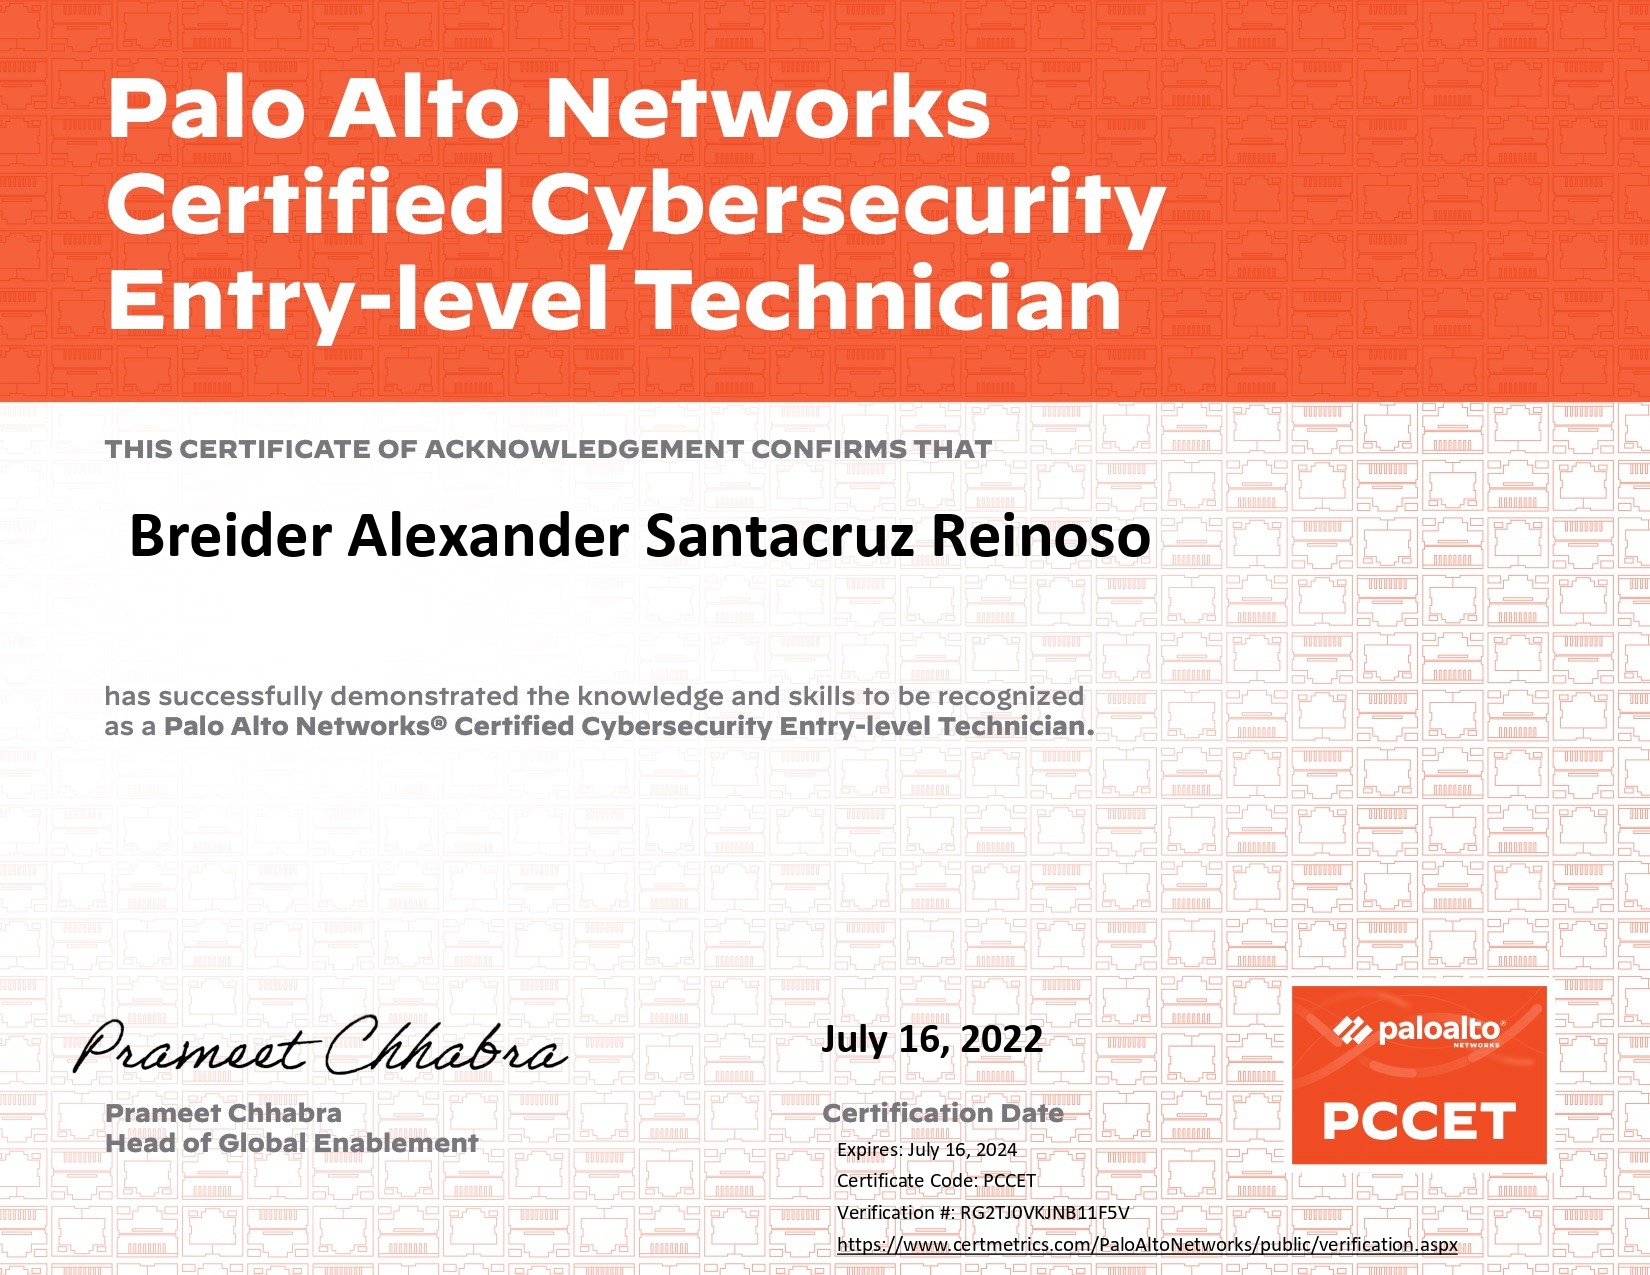 Palo Alto Networks Certified Cyber-Security Entry Level Technician